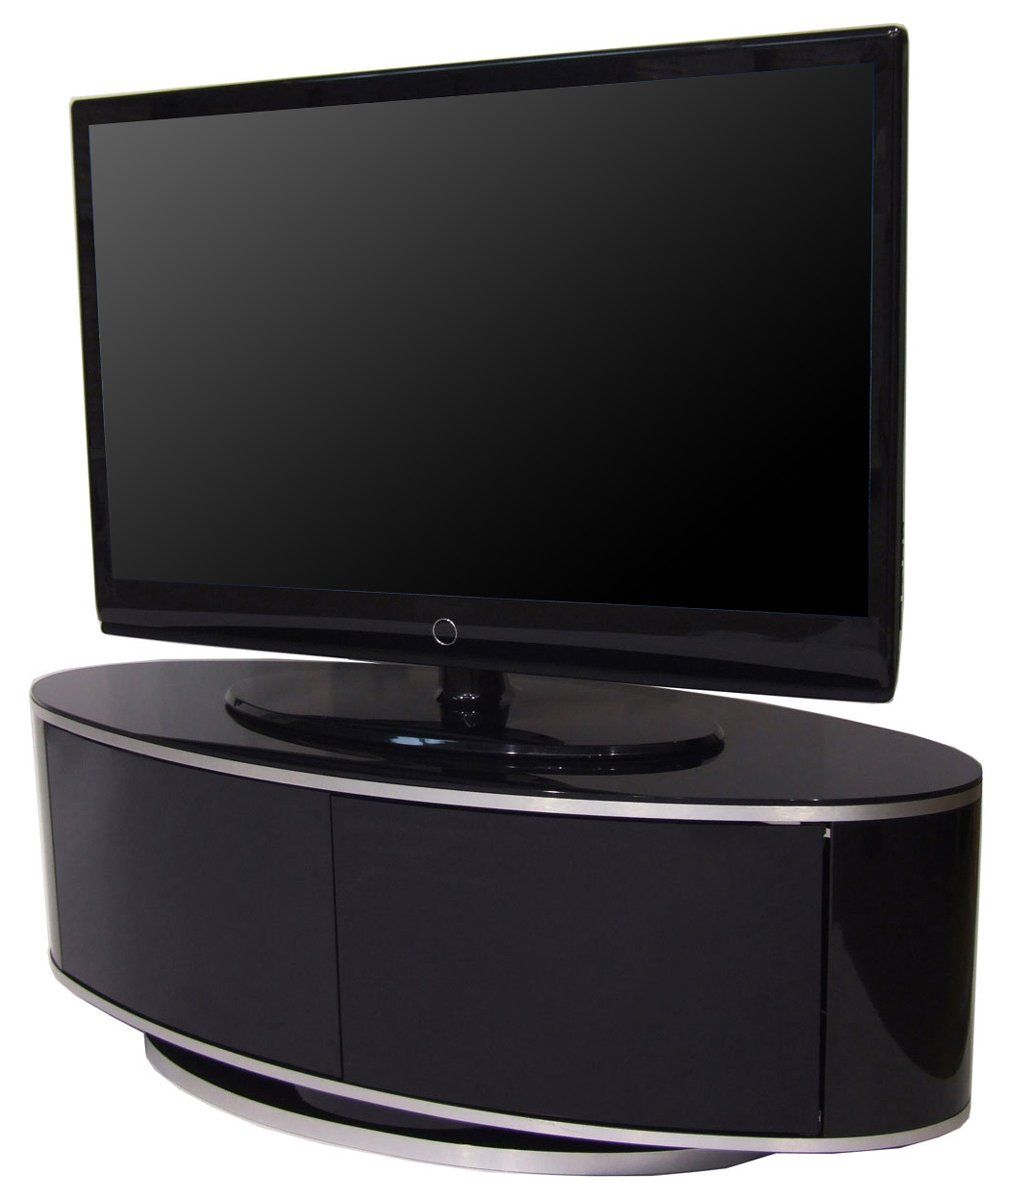 Luna High Gloss Black Oval Tv Cabinet Intended For White Gloss Corner Tv Stand (View 7 of 15)